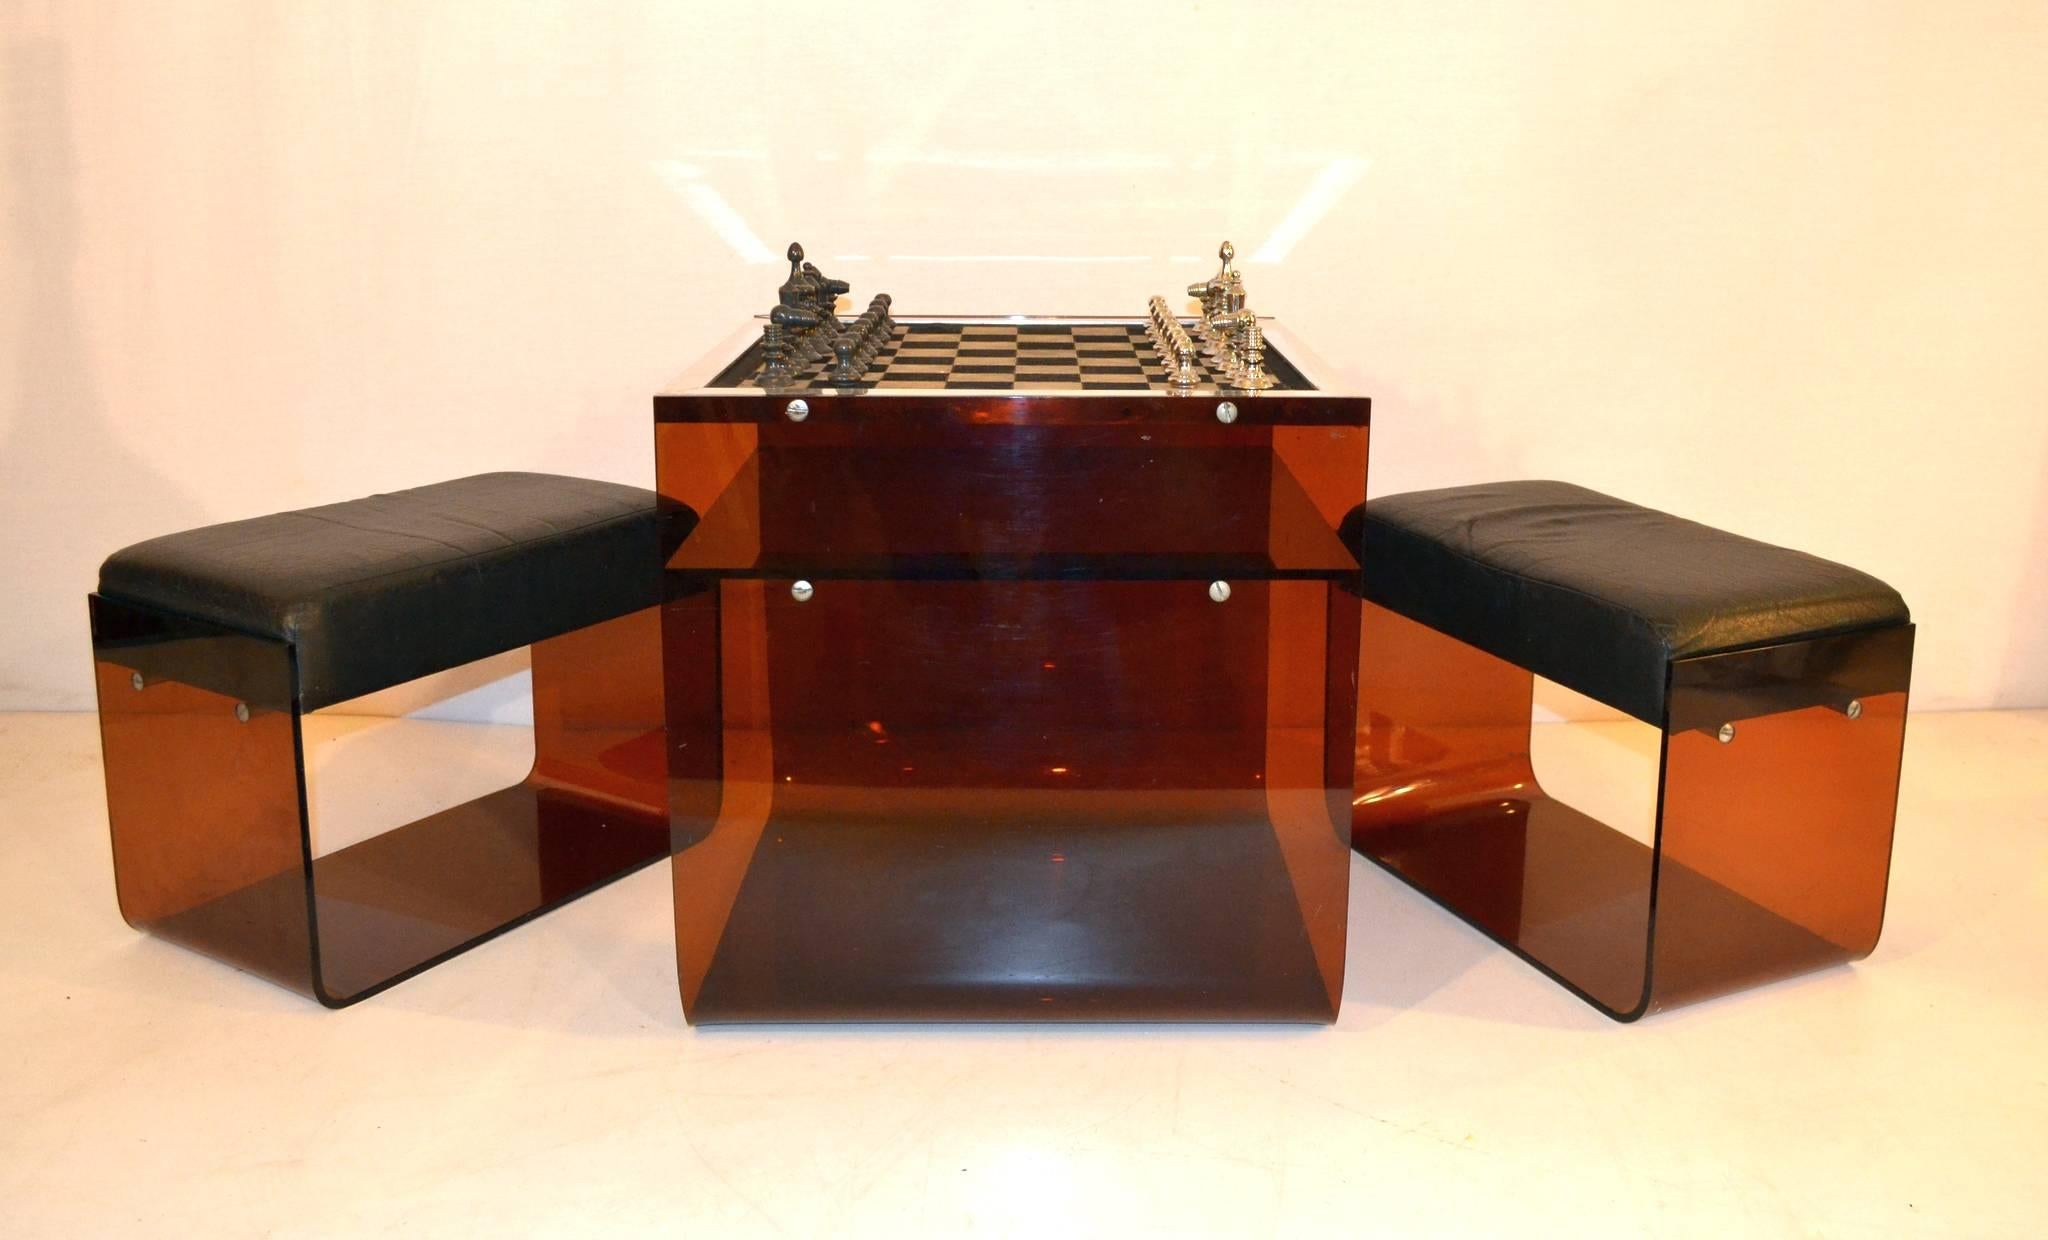 Unusual chess table made from brown plexiglass with a pair of stools with faux leather seating. The chess pieces are solid metal in chrome and gray and  chess board in suede. Around the chess board there is a rim in aluminium. There is also a piece